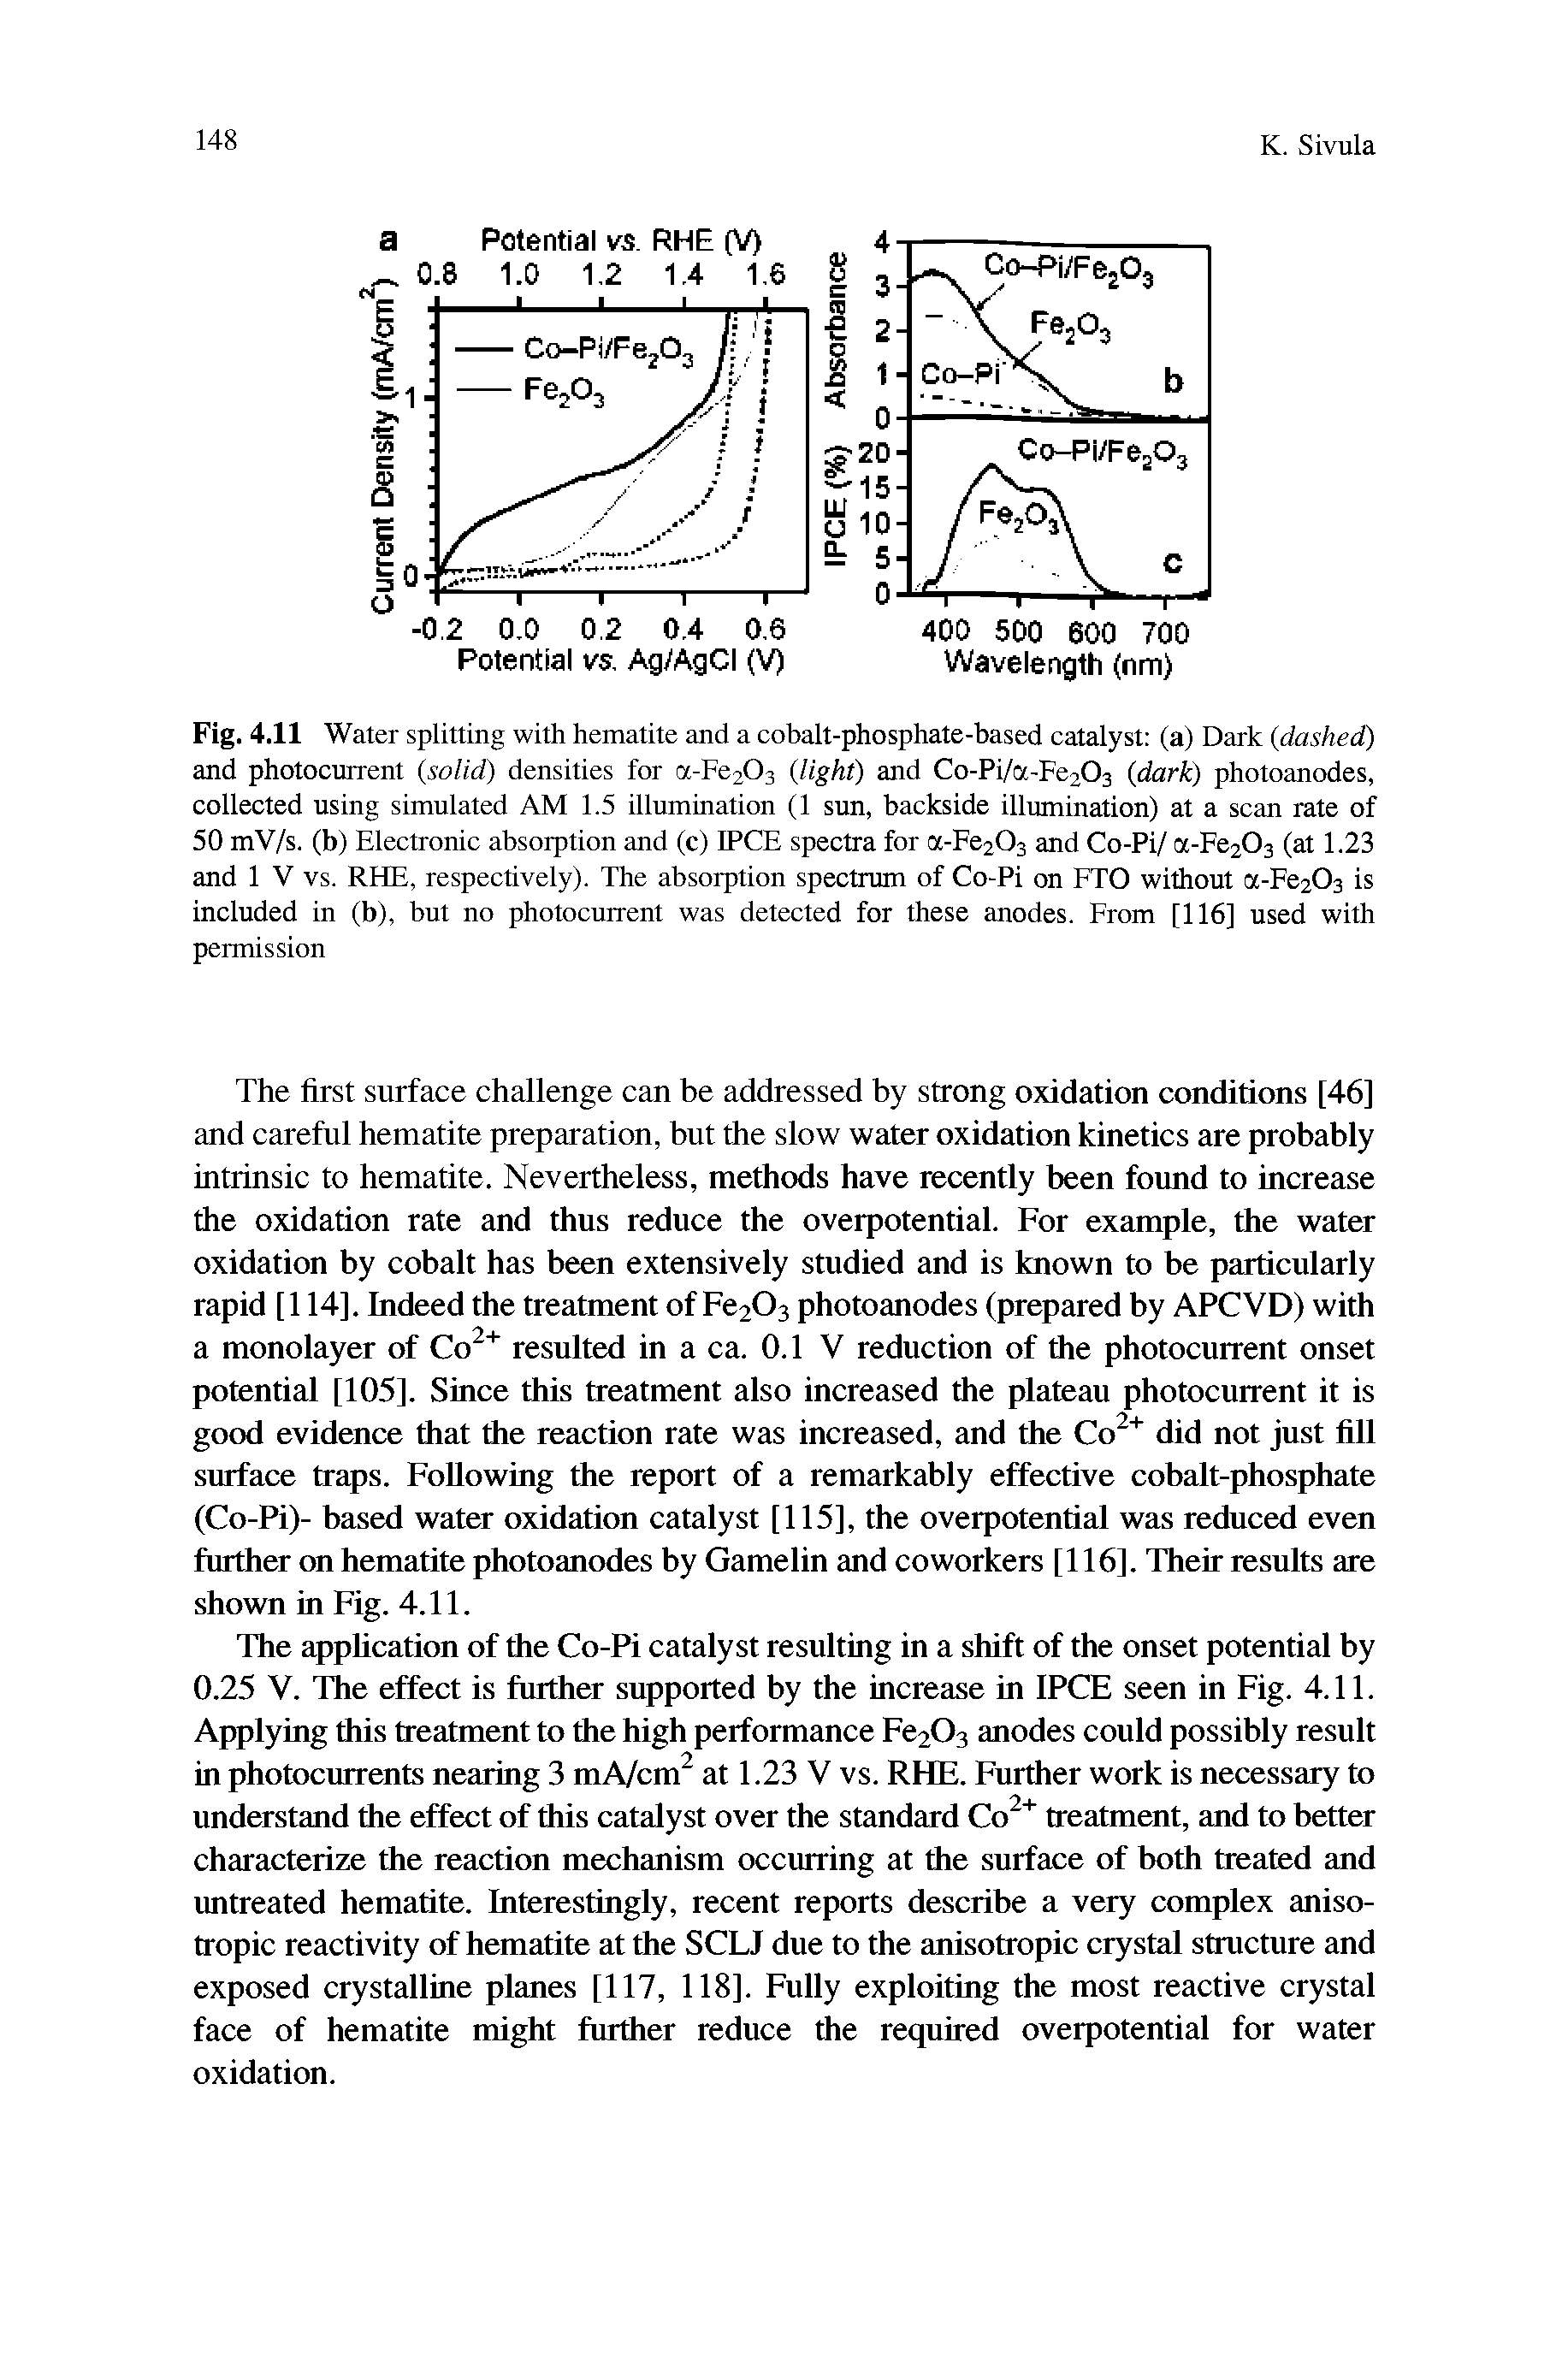 Fig. 4.11 Water splitting with hematite and a cobalt-phosphate-based catalyst (a) Dark (dashed) and photocurrent (solid) densities for a-Fe203 (light) and Co-Pi/a-Fe203 (dark) photoanodes, collected using simulated AM 1.5 illumination (1 sun, backside illumination) at a scan rate of 50 mV/s. (b) Electronic absorption and (c) IPCE spectra for a-Fe203 and Co-Pi/ a-Fc203 (at 1.23 and 1 V vs. RHE, respectively). The absorption spectrum of Co-Pi on FTO without a-Fe203 is included in (b), but no photocurrent was detected for these anodes. From [116] used with permission...